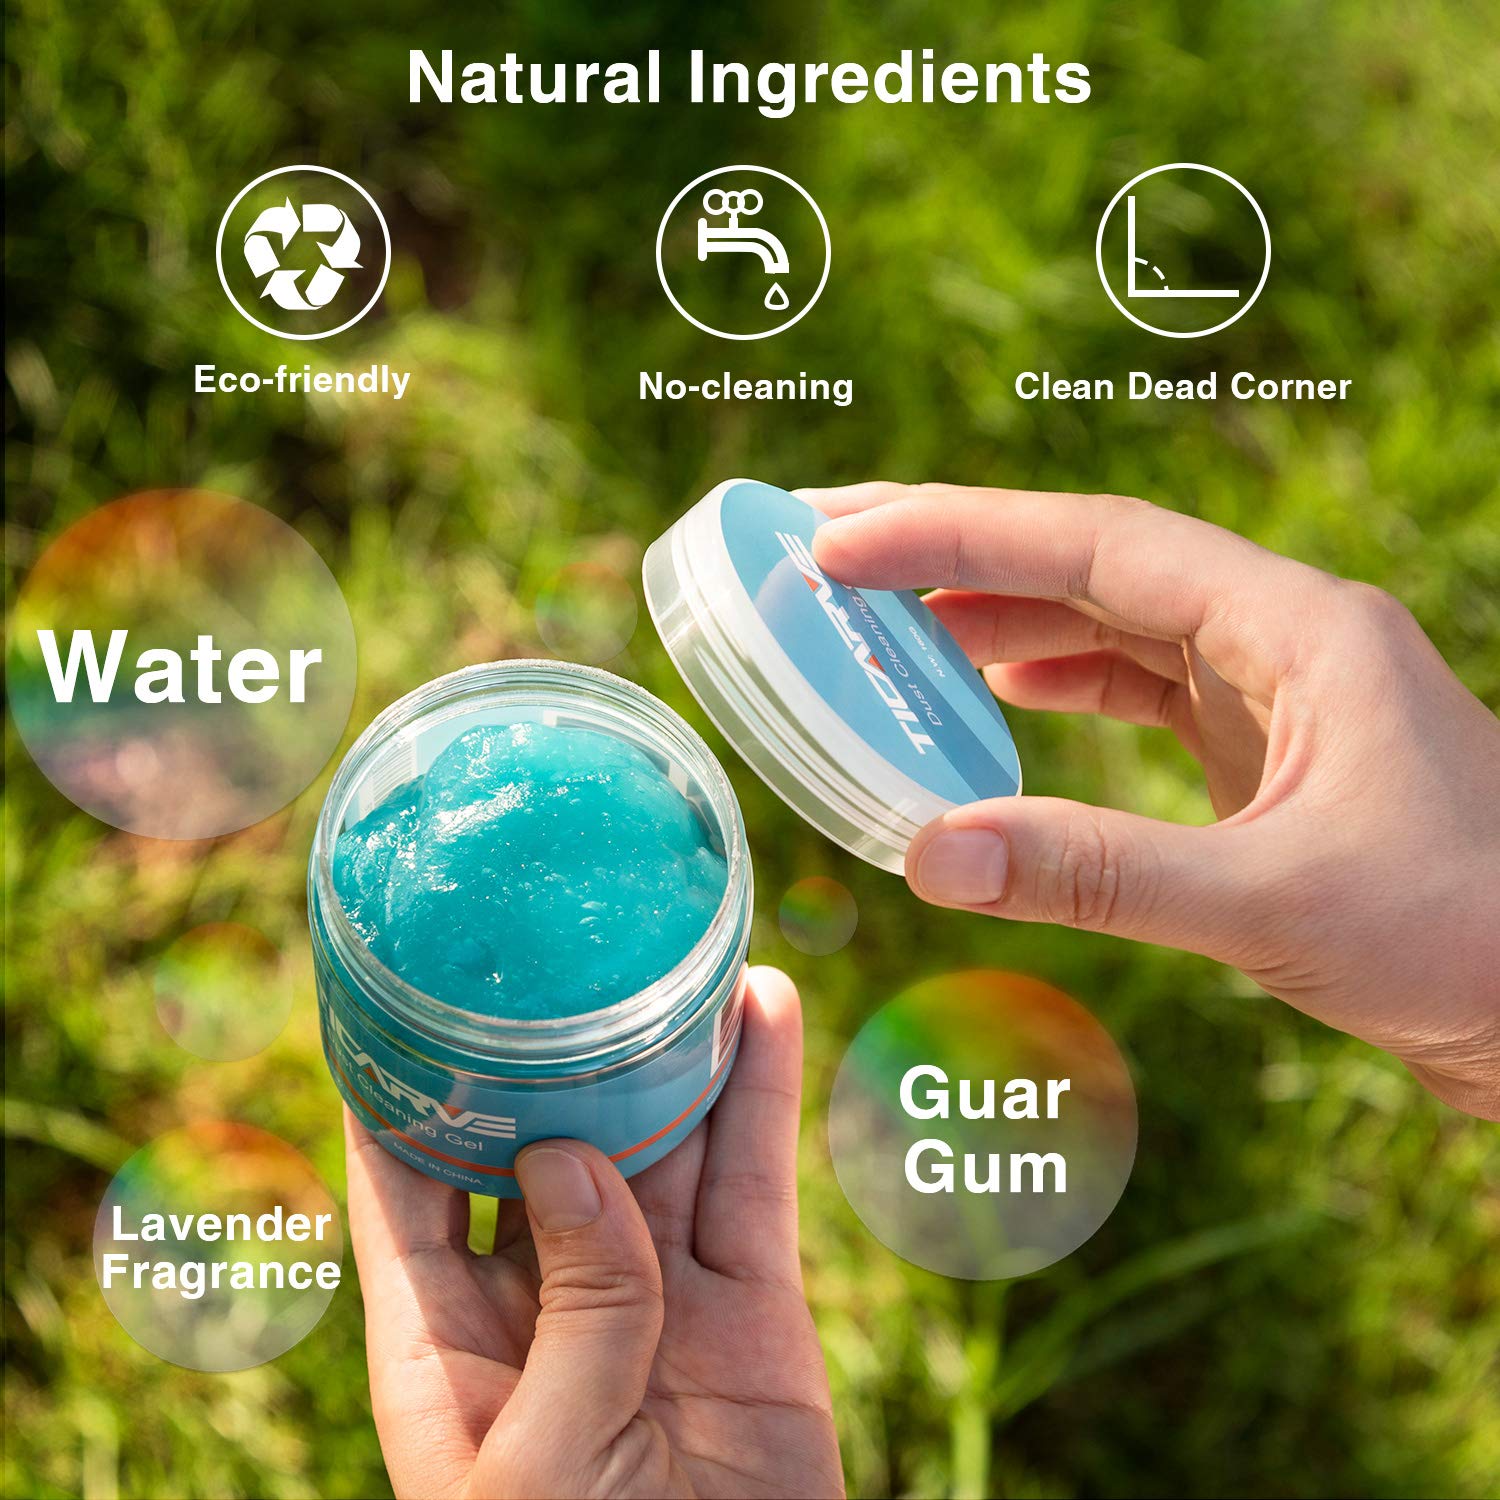 TICARVE Cleaning Gel for Car Detail Tools Car Cleaning Automotive Dust Air Vent Interior Detail Putty Universal Dust Cleaner for Auto Laptop Car Slime Cleaner